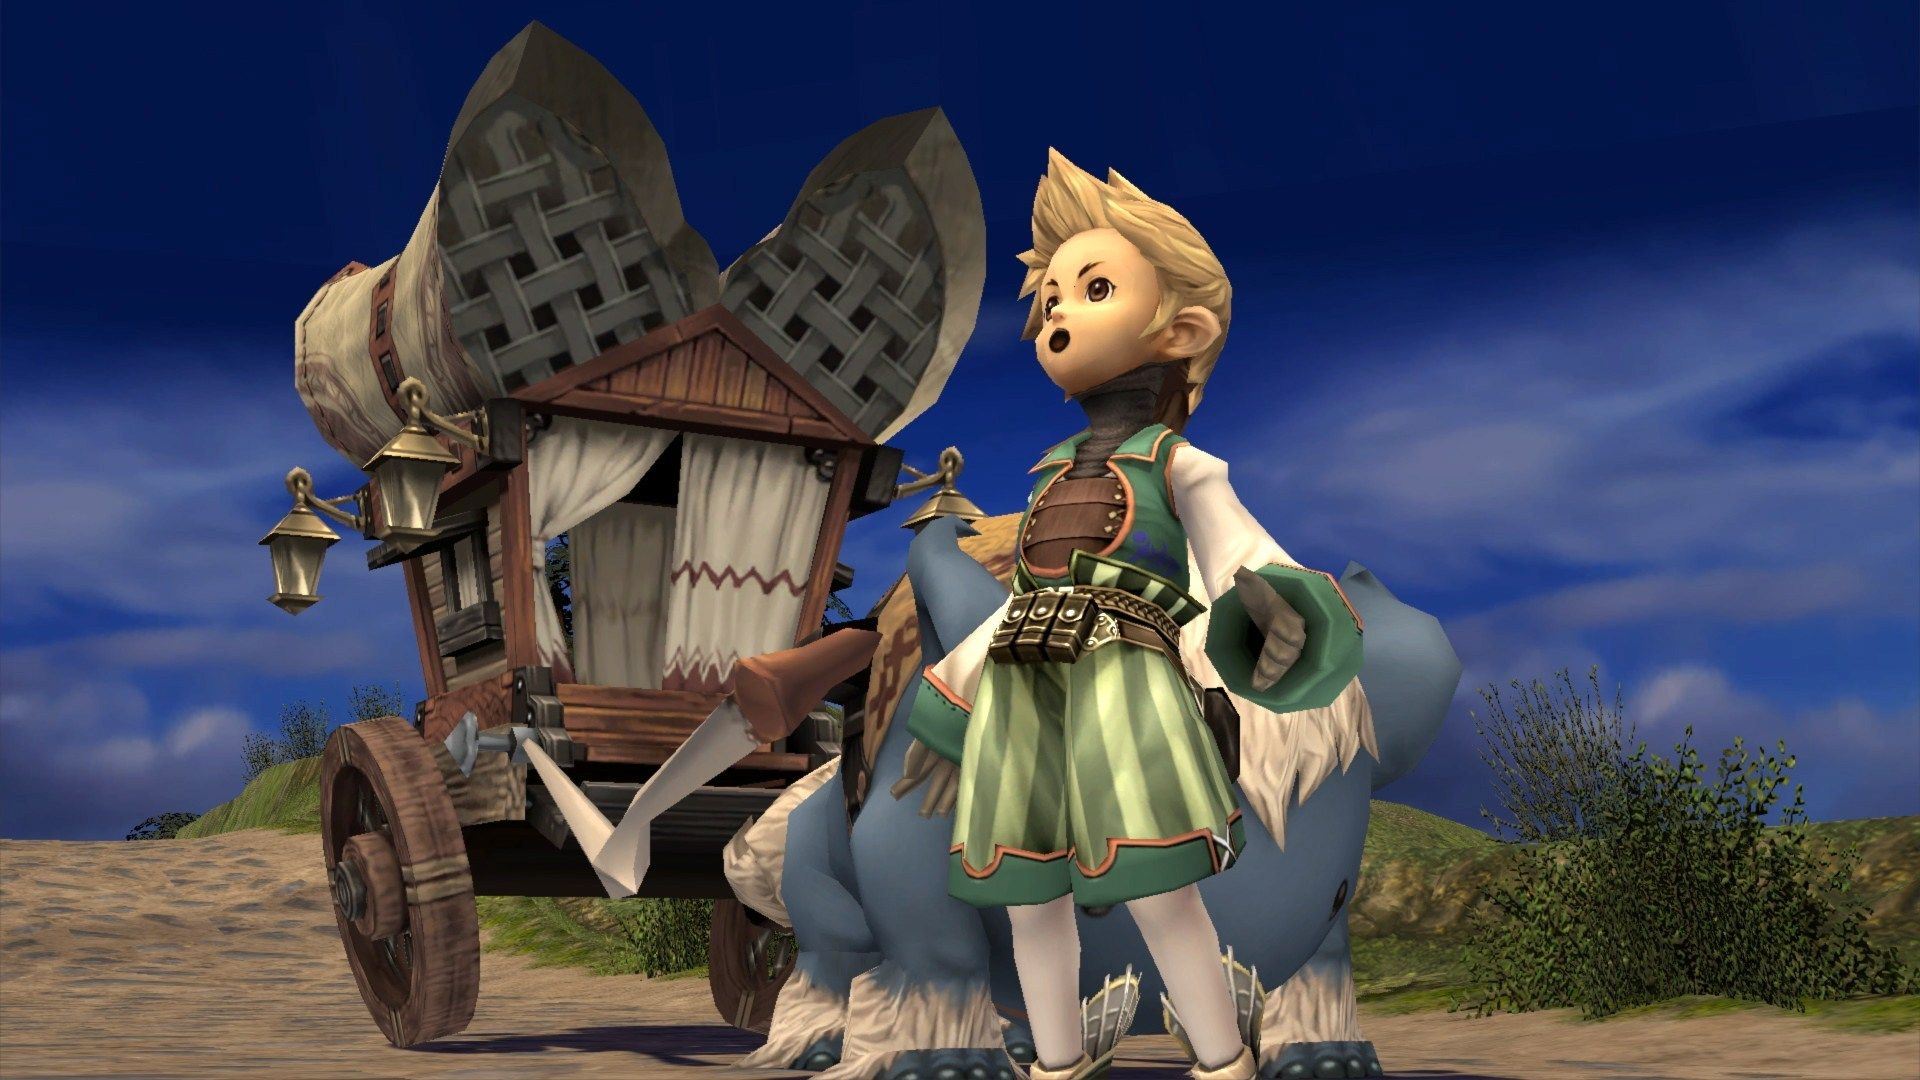 Polish game retailer lists Final Fantasy Crystal Chronicles: Remastered Edition with an Aug. 28th, 2020 release date